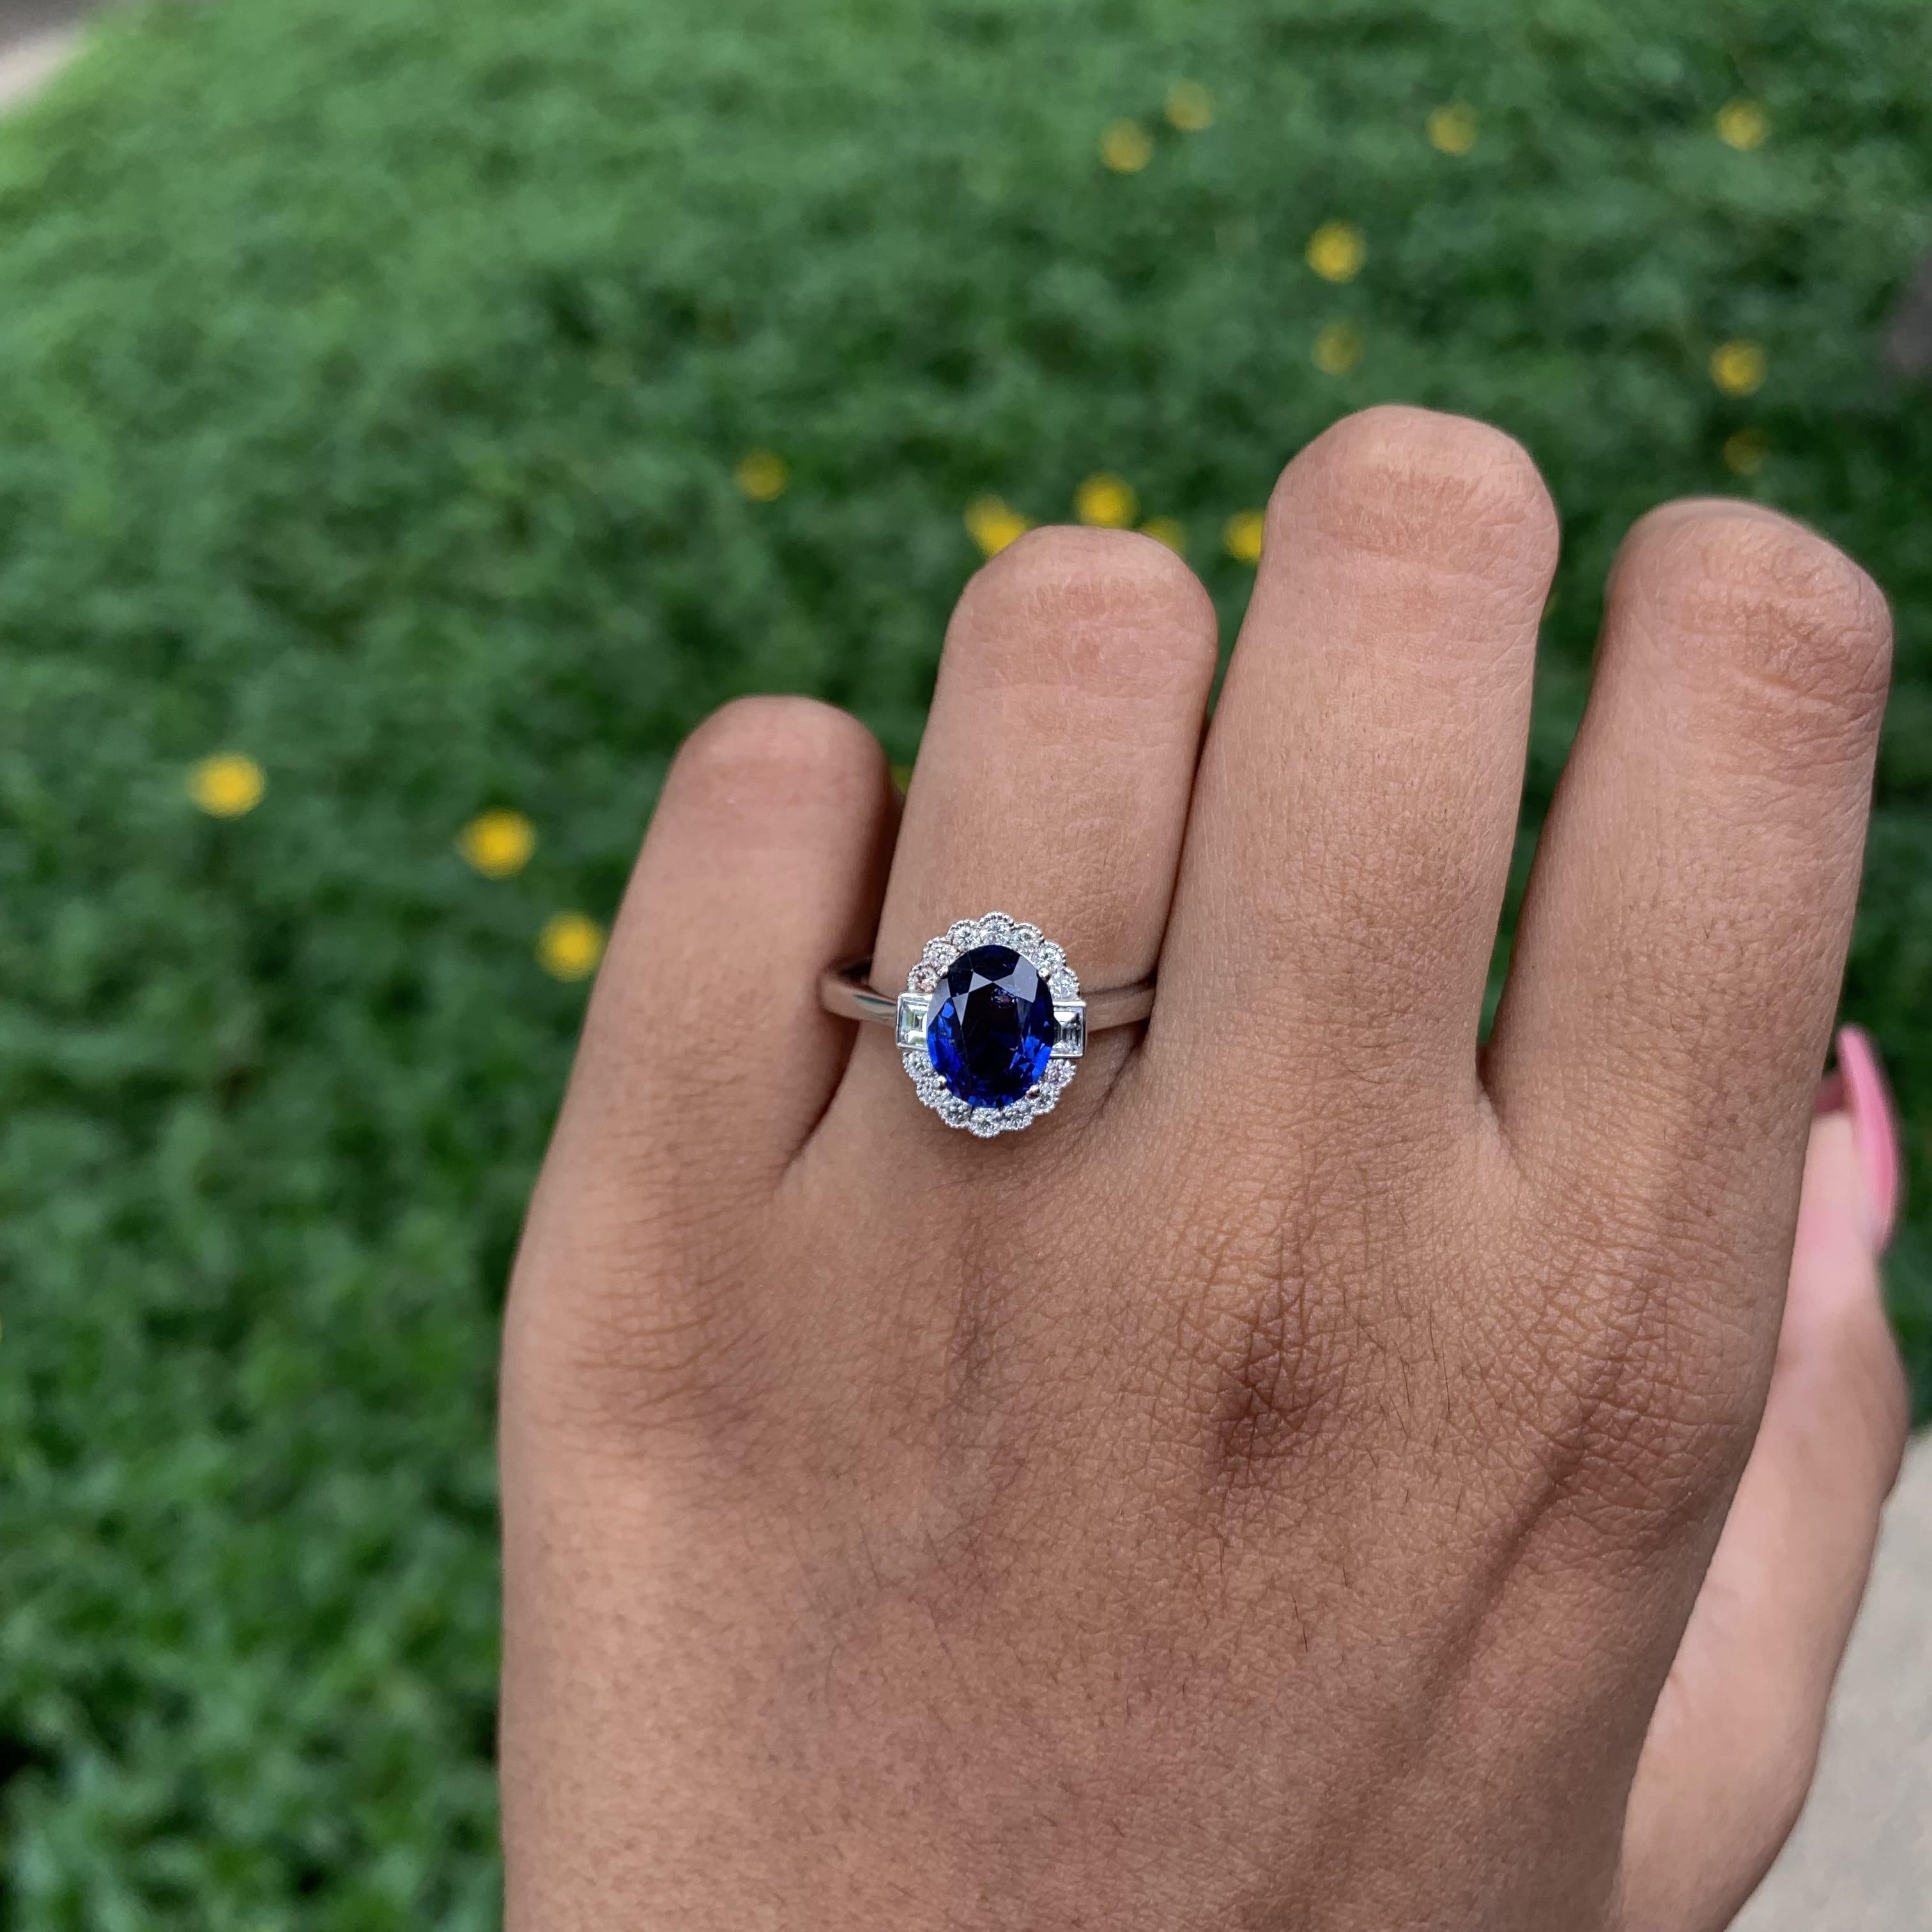 Radiating timeless elegance, this extraordinary piece has been specially designed to accentuate the mesmerizing beauty of this royal blue sapphire.

The sapphire, a regal emblem of rich sophistication, boasts a captivating royal blue hue and a total